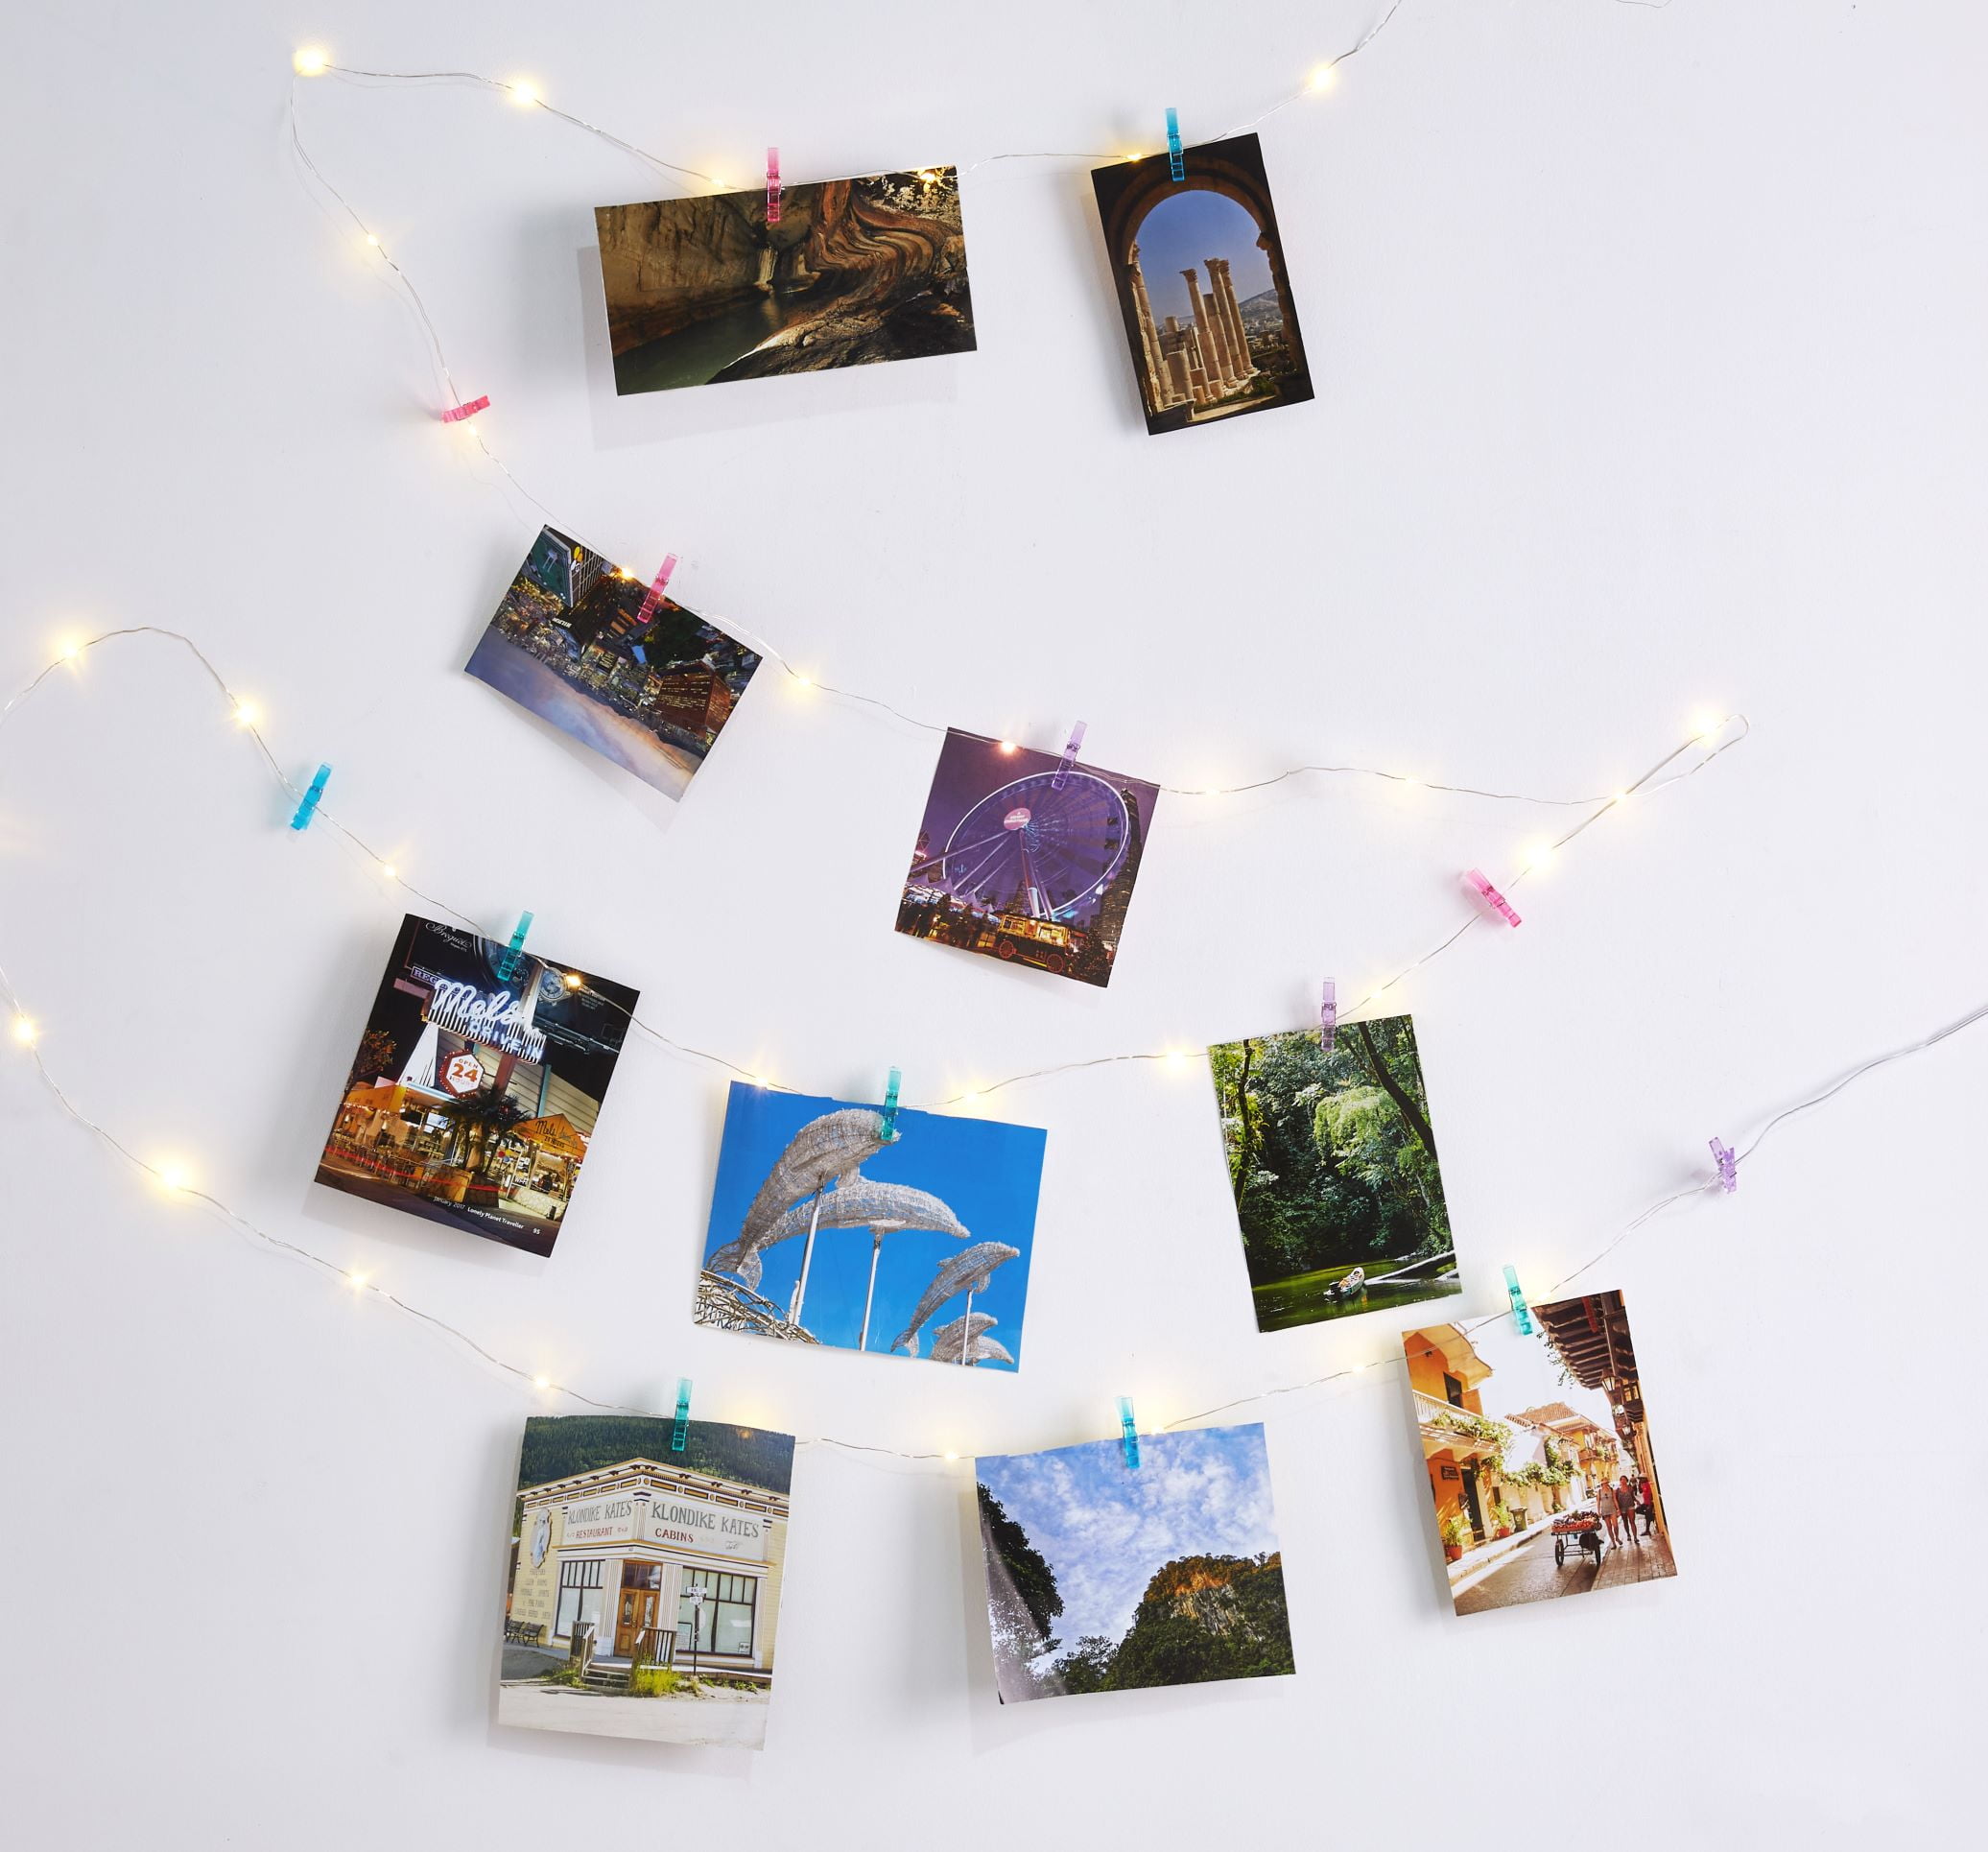 Vivitar Photo Clip String Lights 15Ft - 36 LED Fairy String Lights with 16  Colored Clips for Hanging Pictures, Perfect Dorm Bedroom Wall Decor Wedding  Decorations - Walmart.com